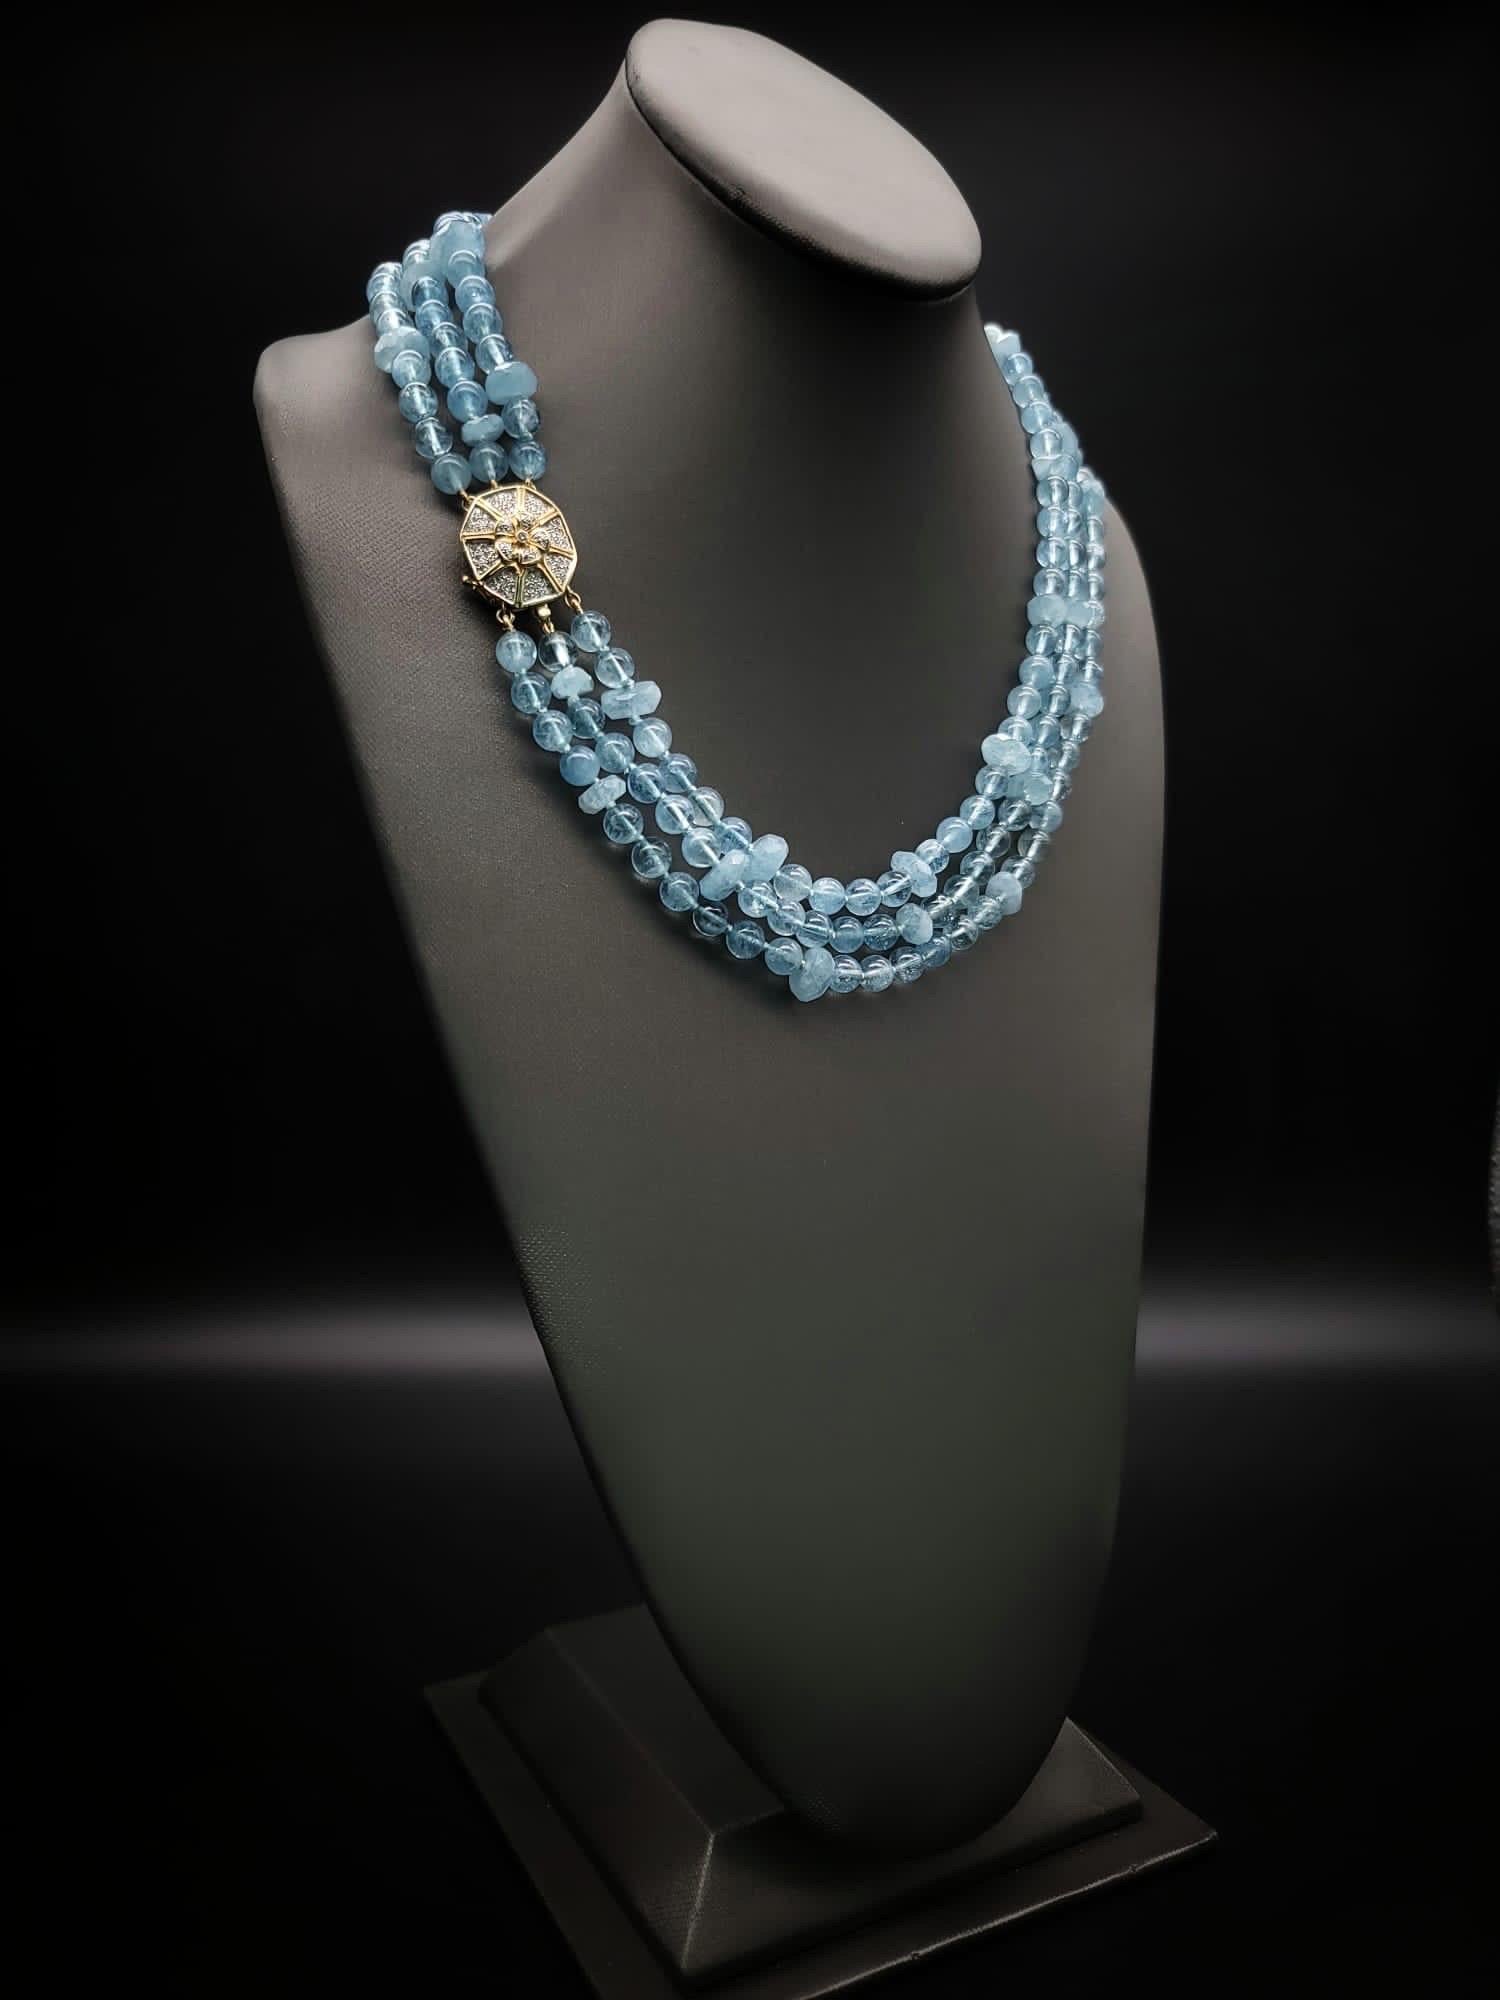 A.Jeschel AAA Aquamarine necklace with a 14k Gold Diamond clasp. 2